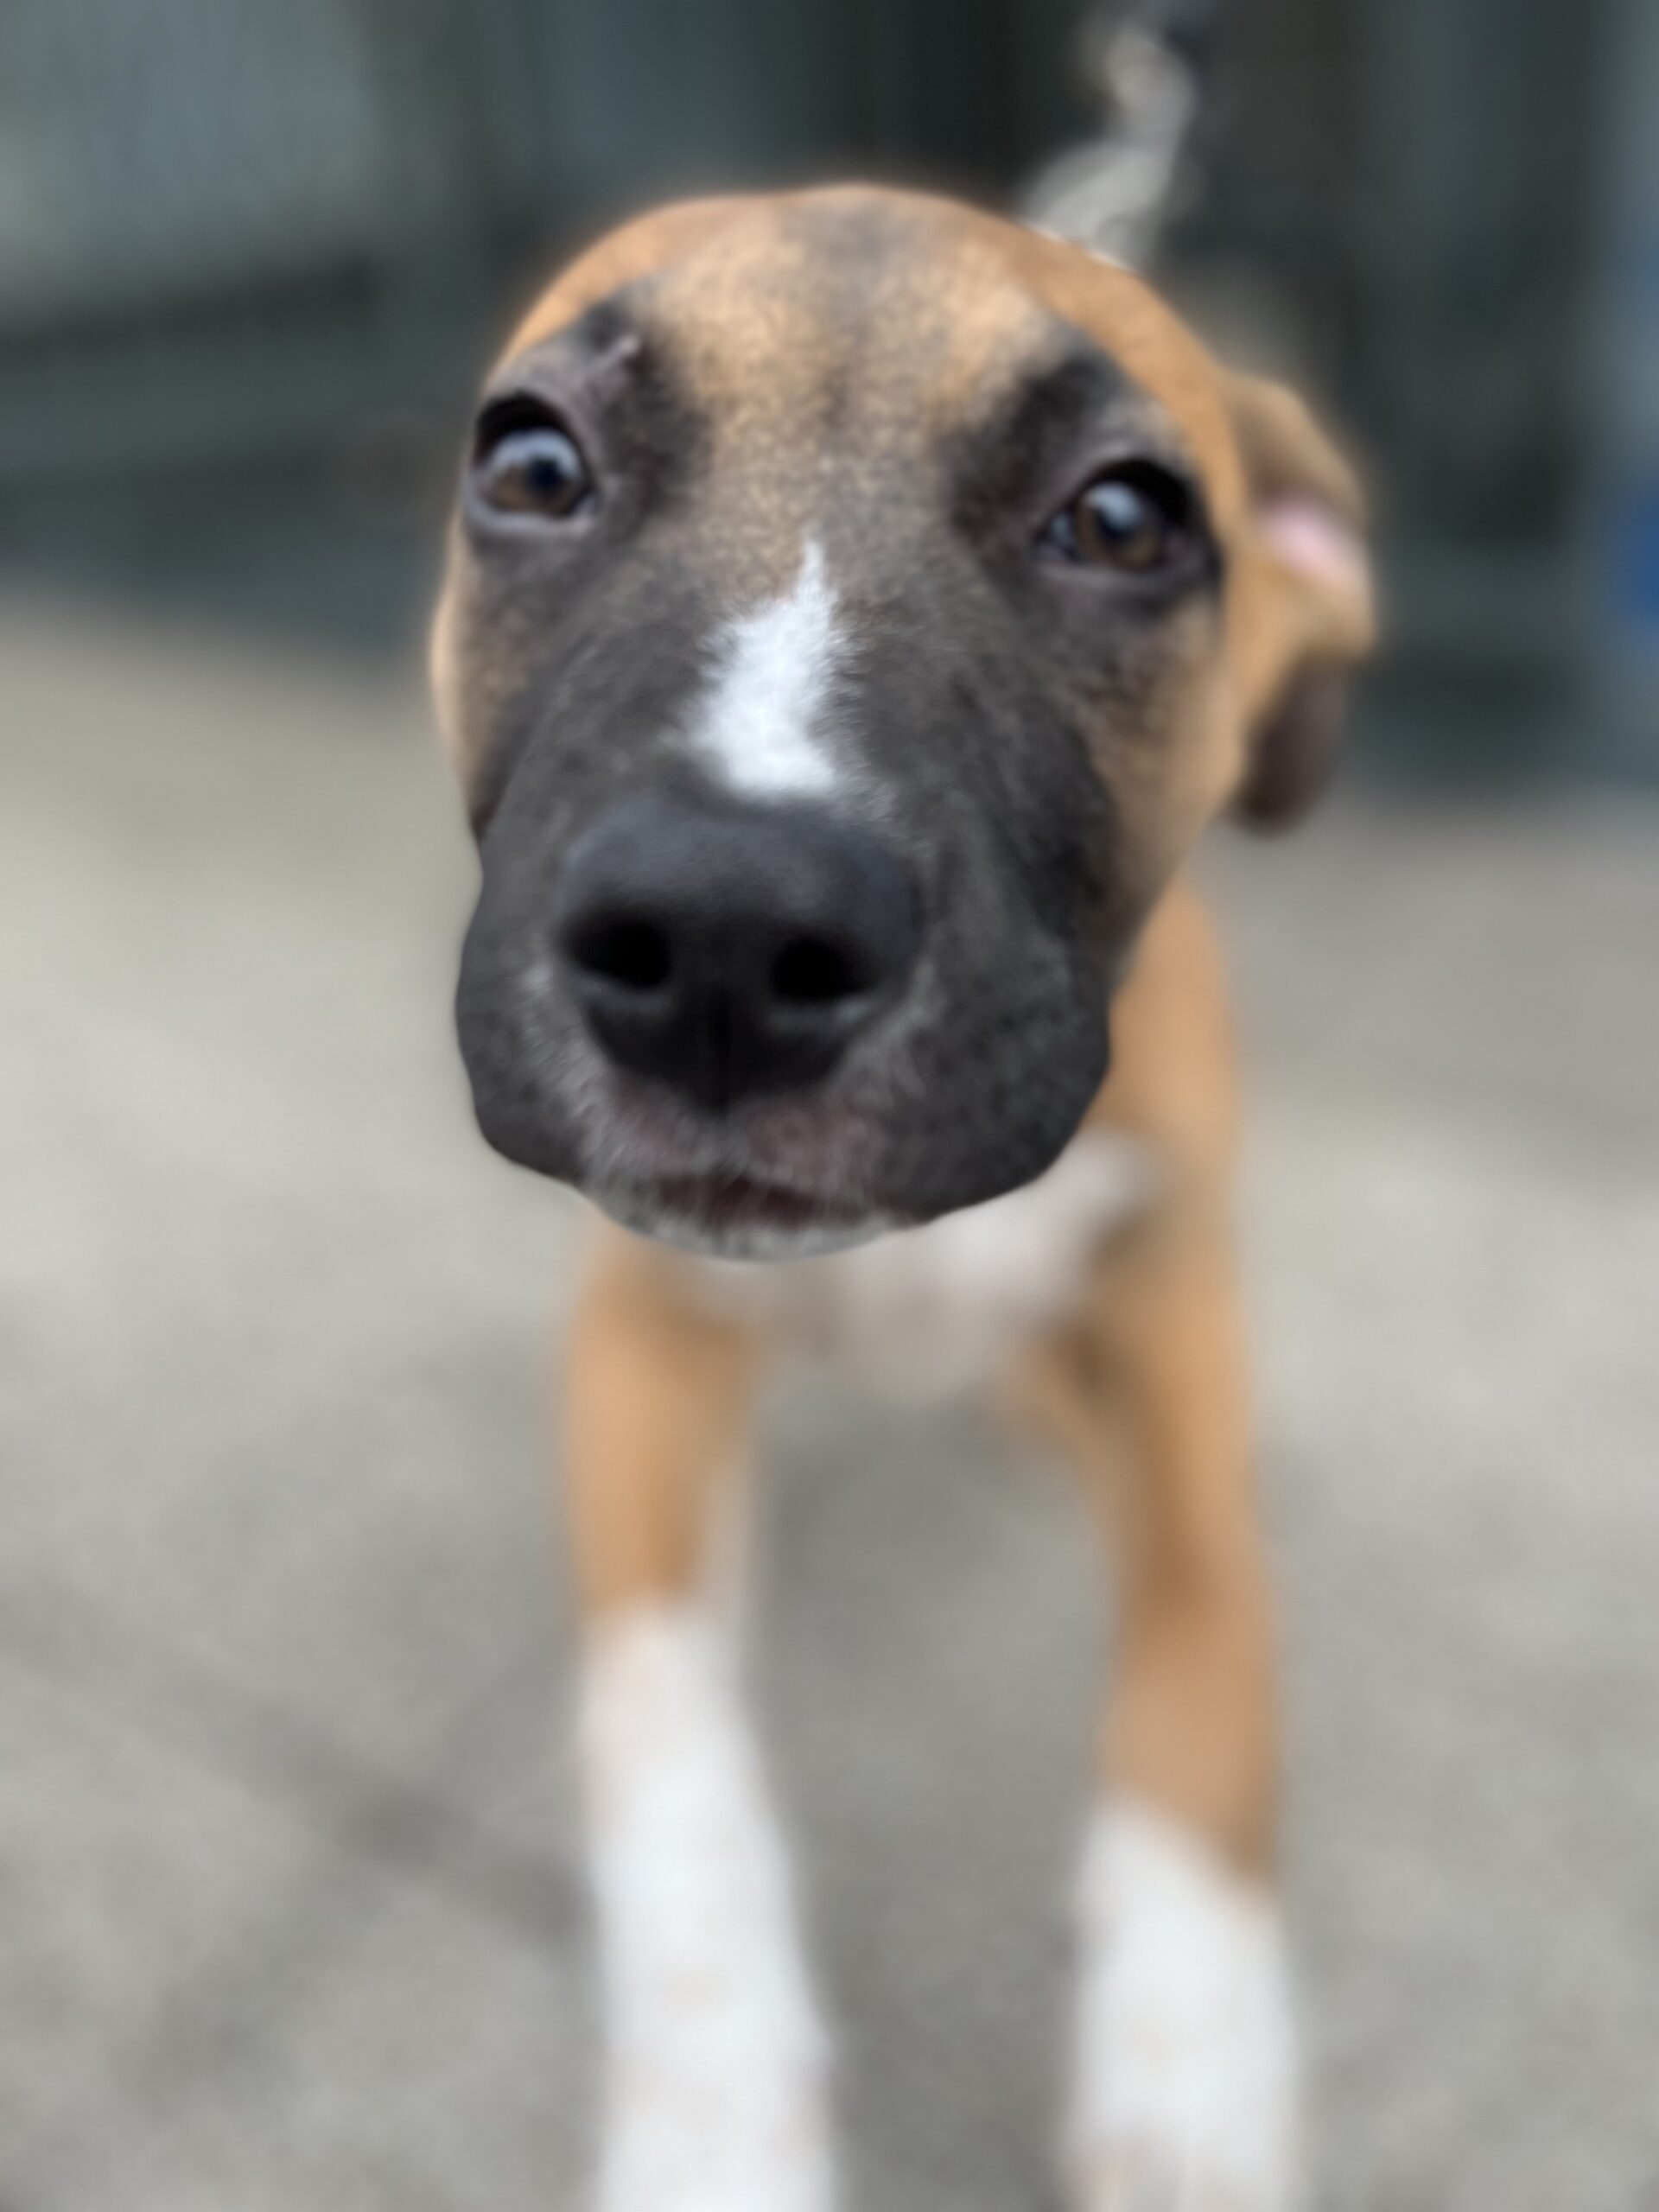 Boxer Mix Puppy Putting His Nose In The Camera Lens